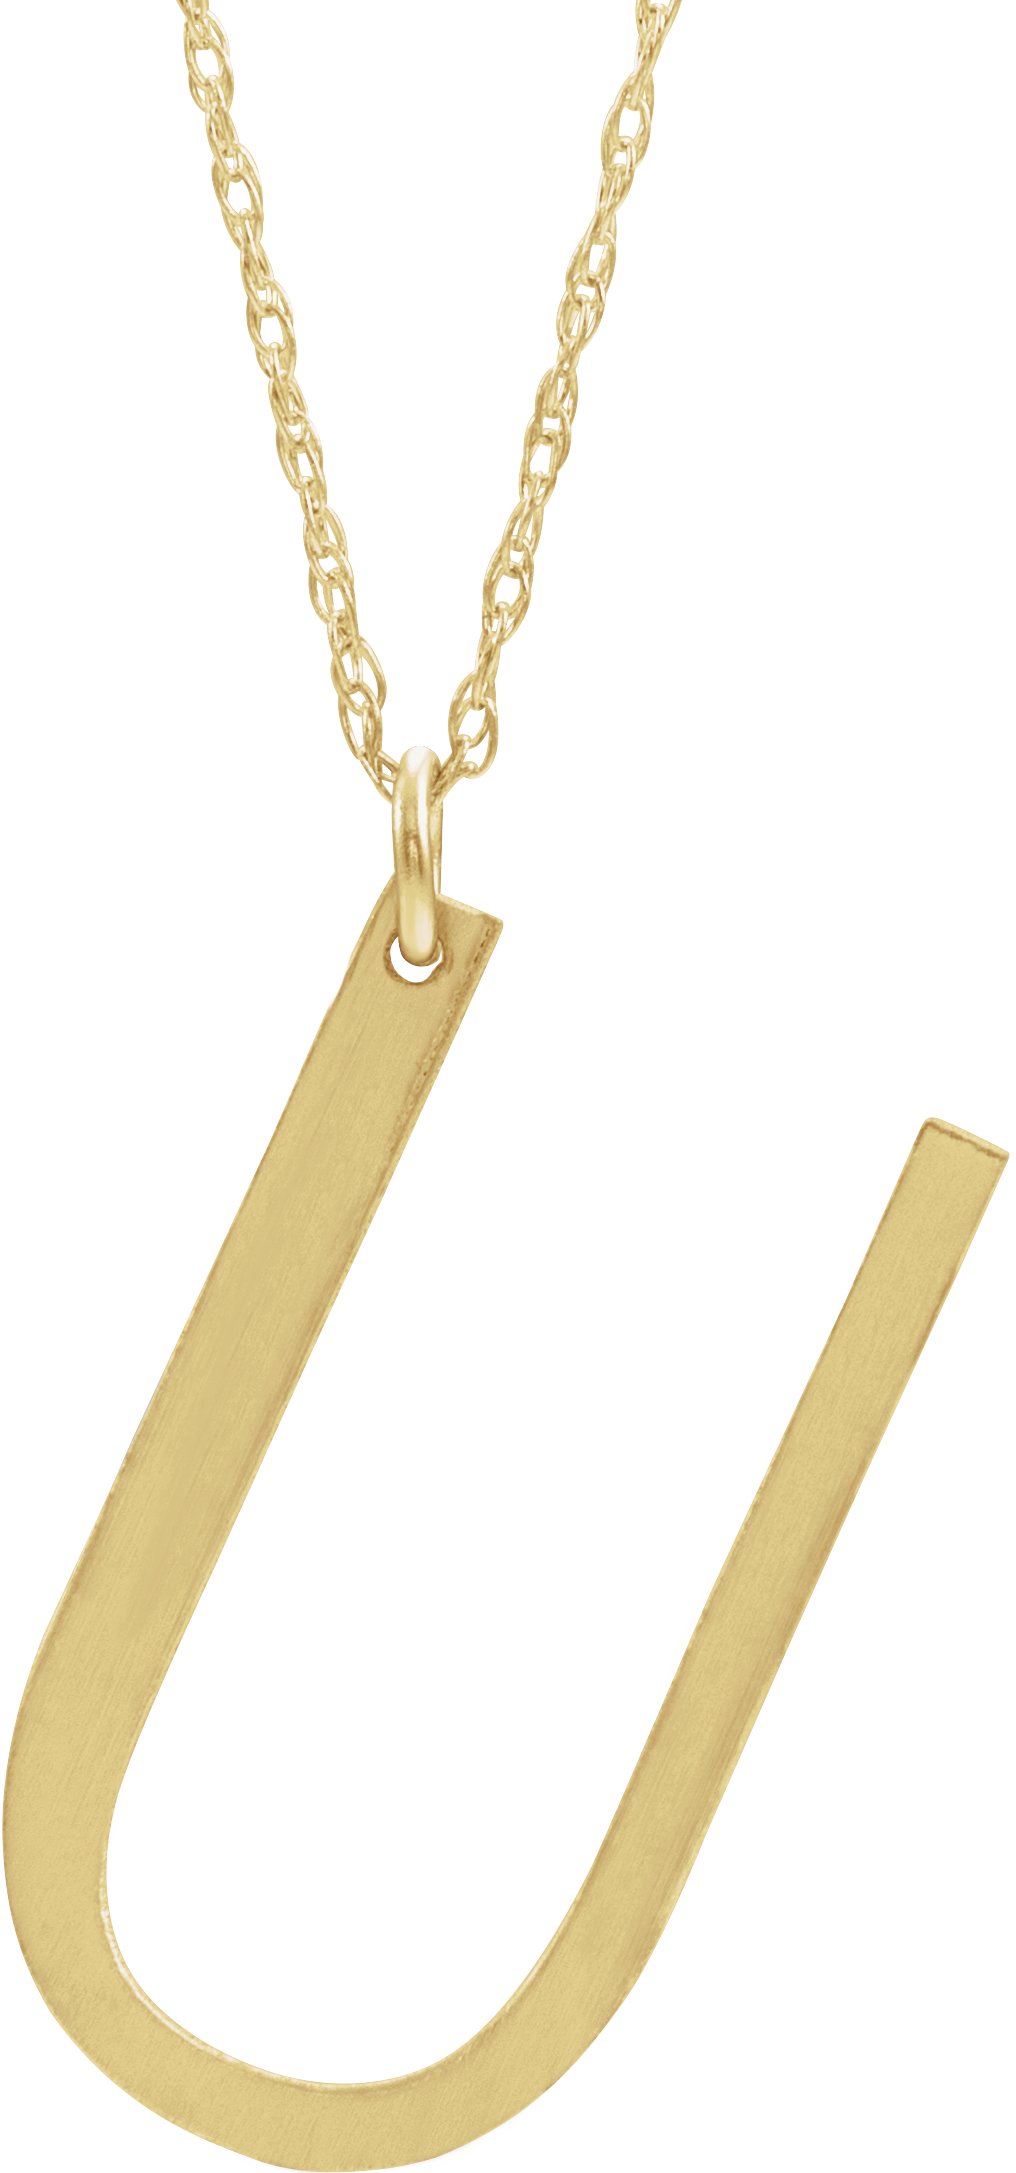 14K Yellow Gold-Plated Sterling Silver Block Initial U 16-18" Necklace with Brush Finish